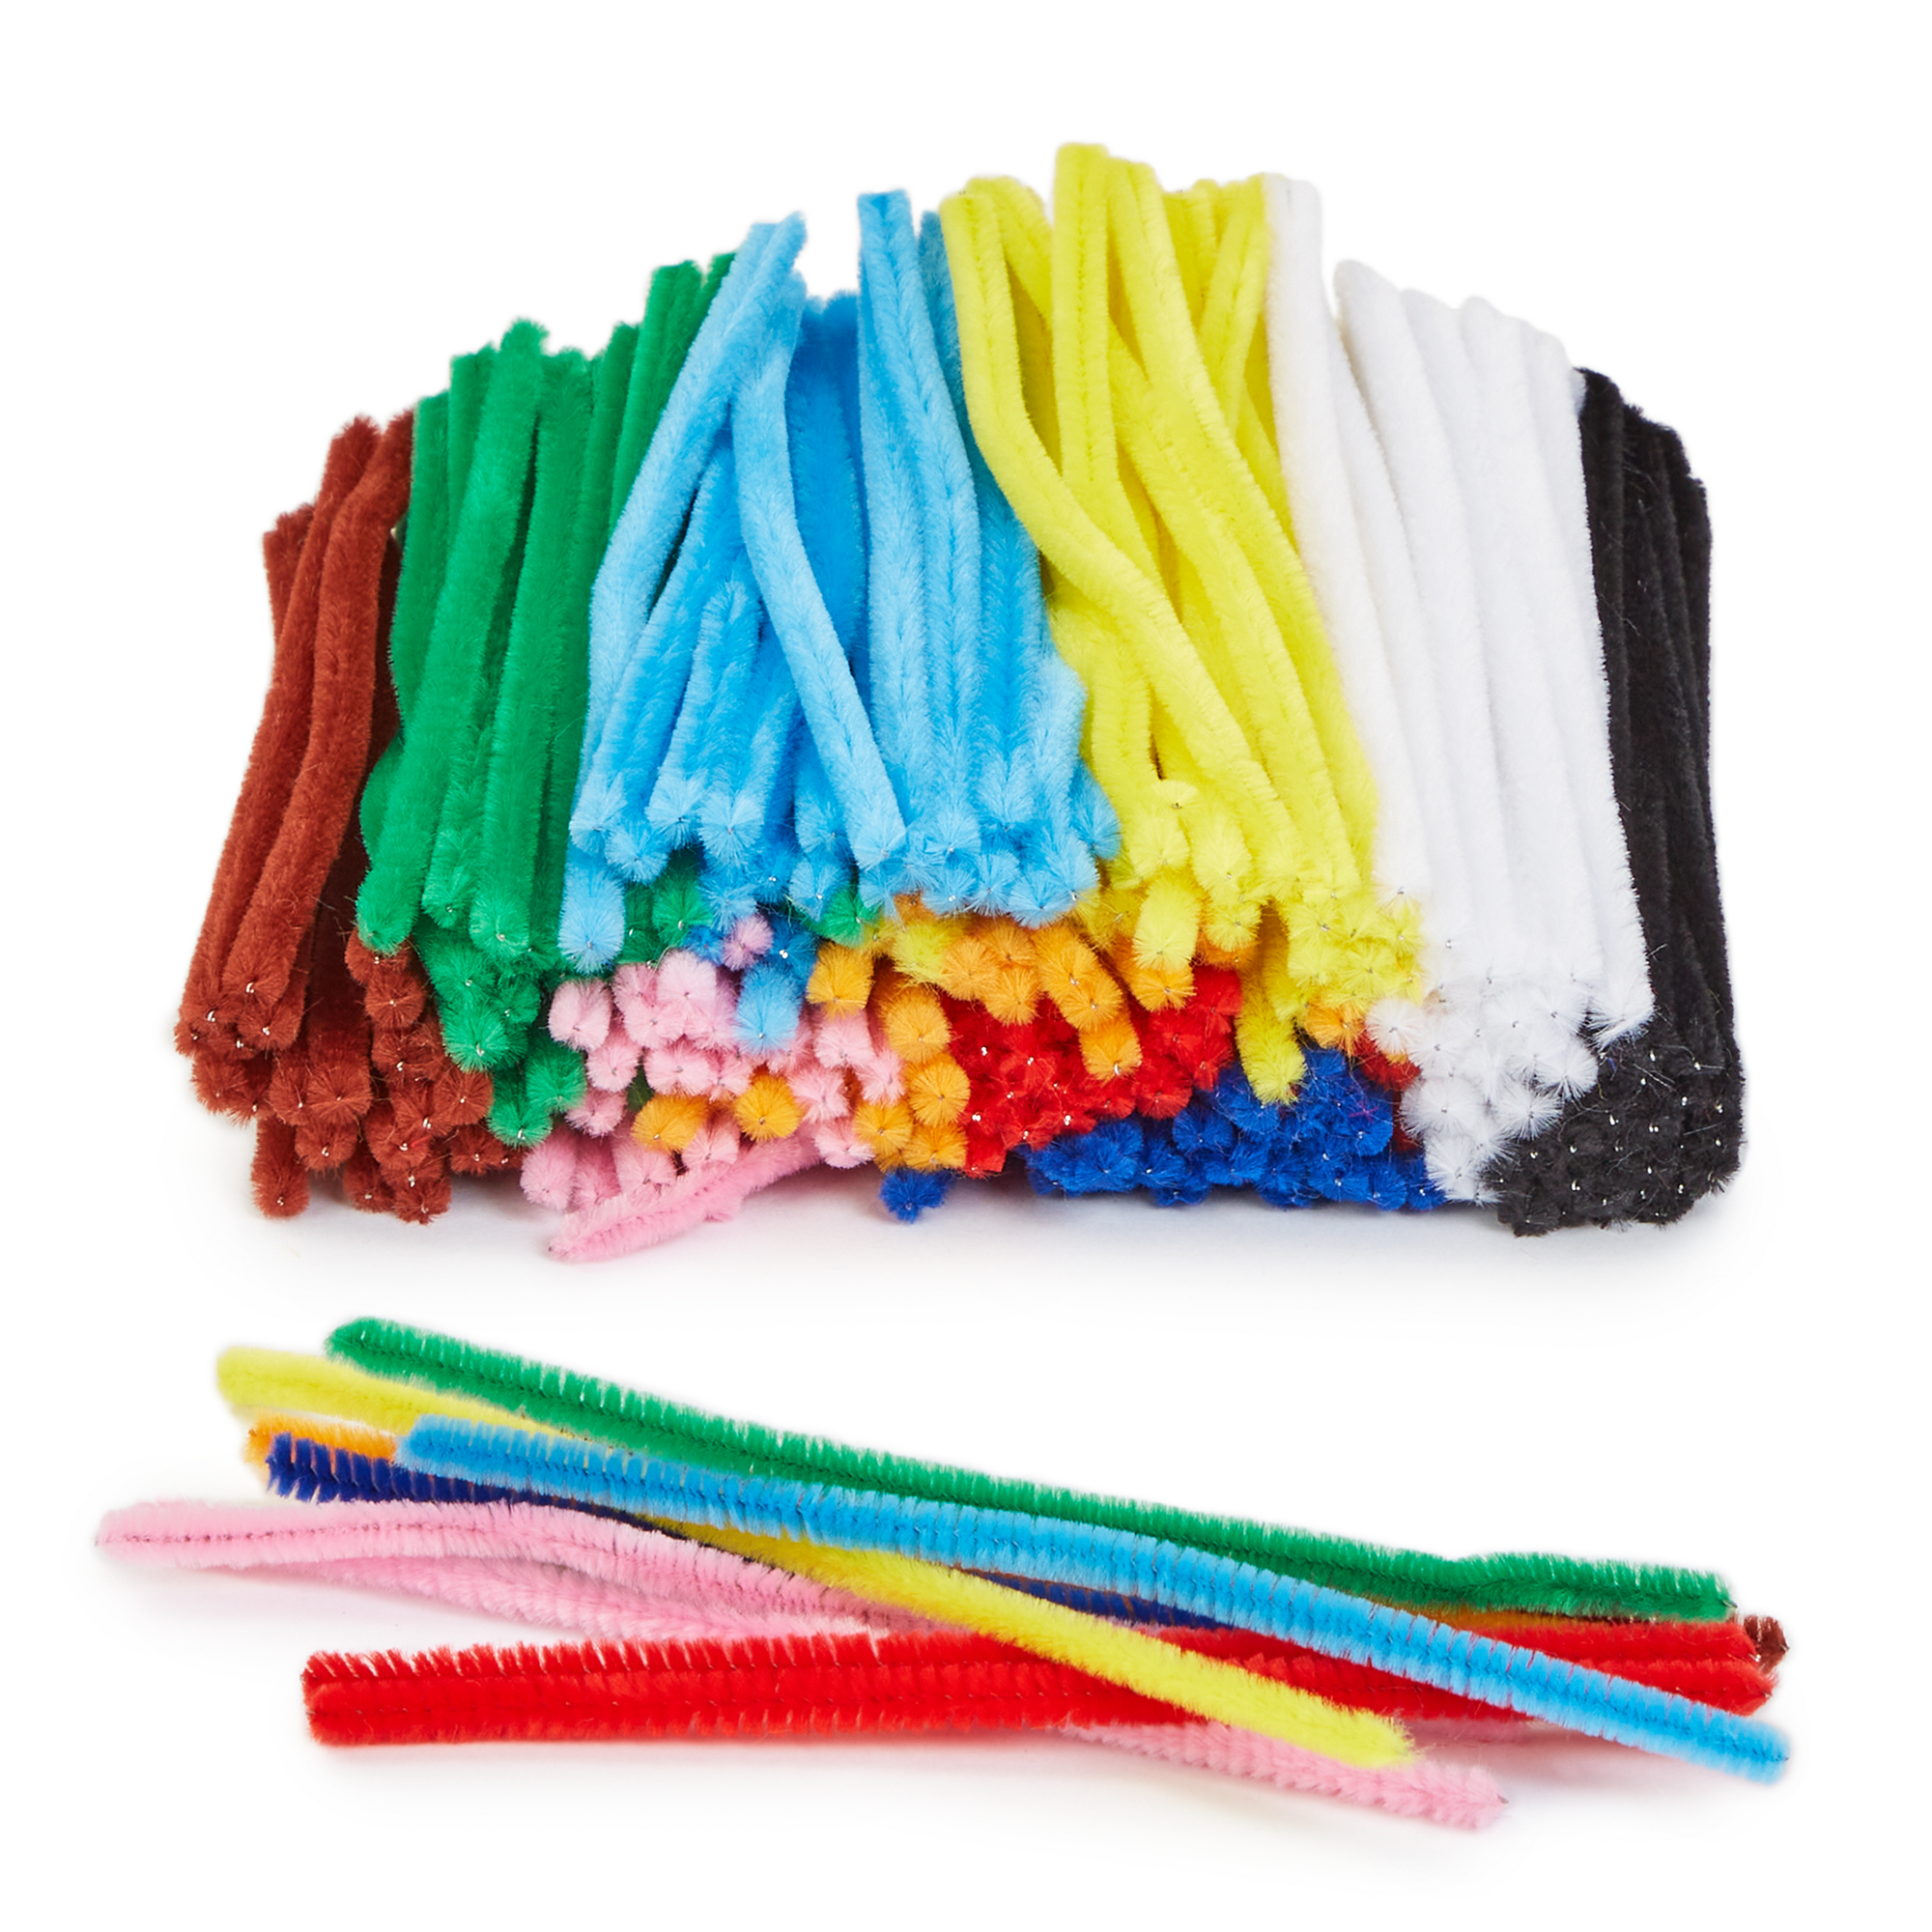 C157540 - Classmates Craft Pipe Cleaners - 150mm - Pack of 250